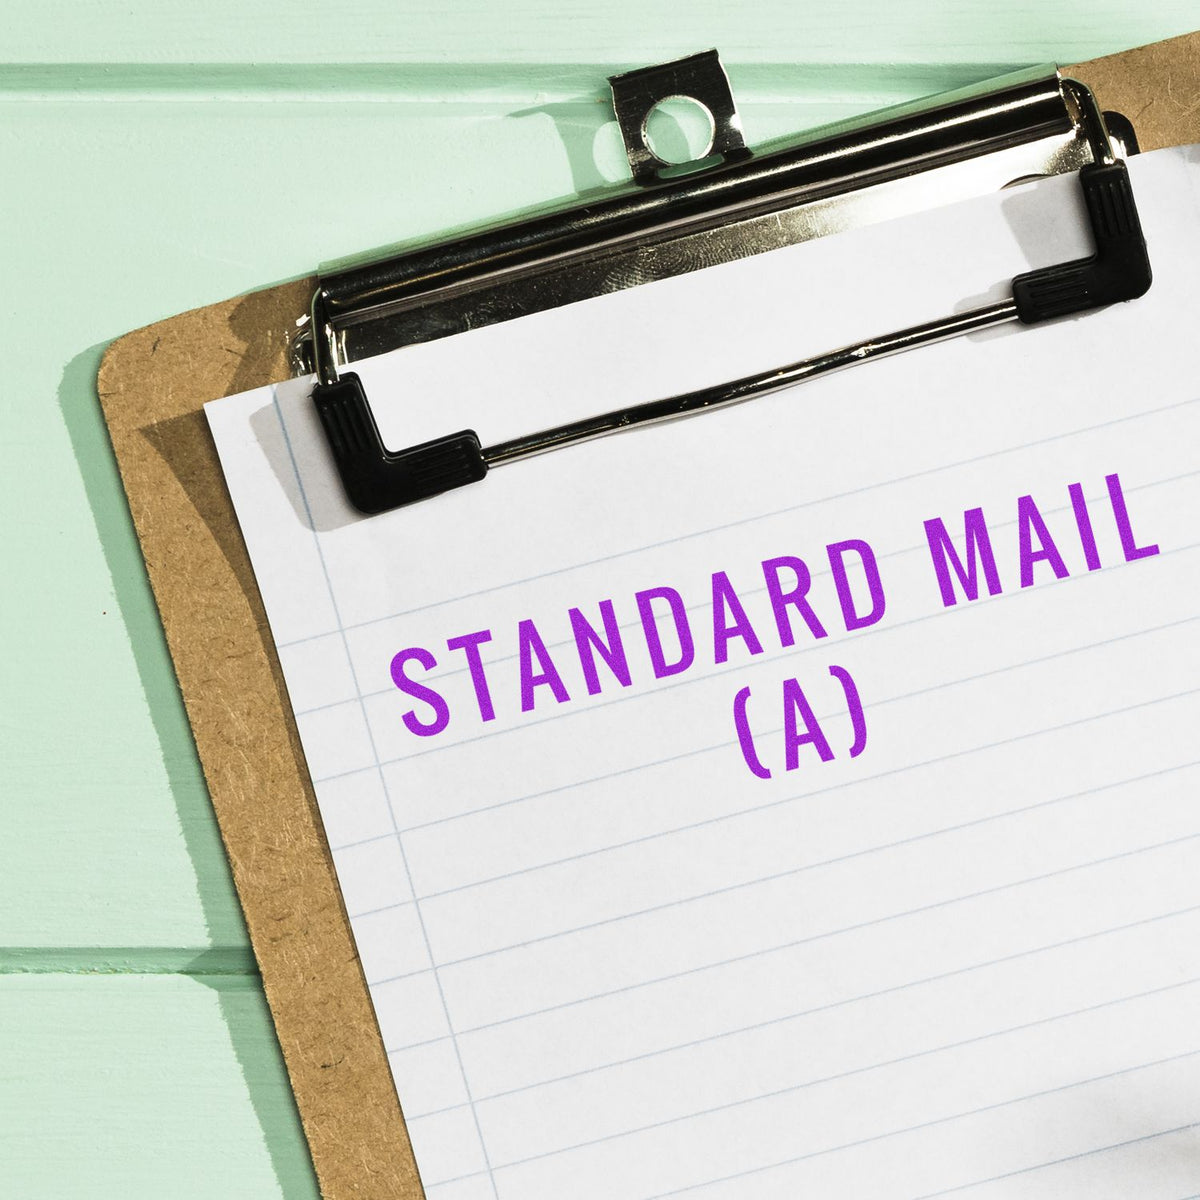 Large Pre-Inked Standard Mail (A) Stamp In Use